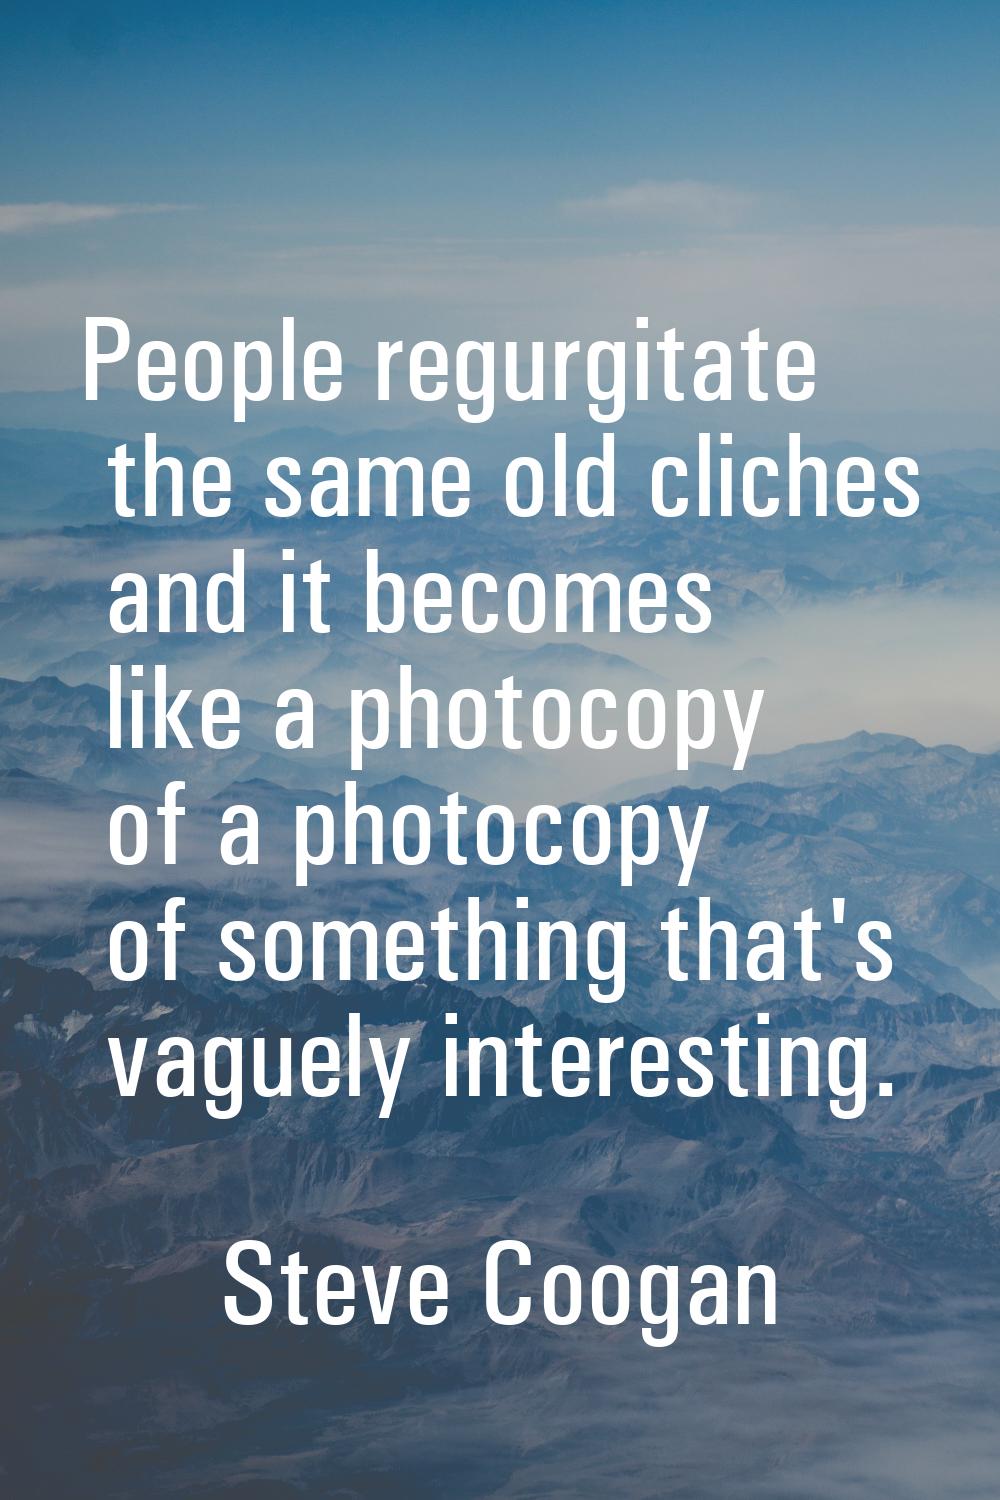 People regurgitate the same old cliches and it becomes like a photocopy of a photocopy of something